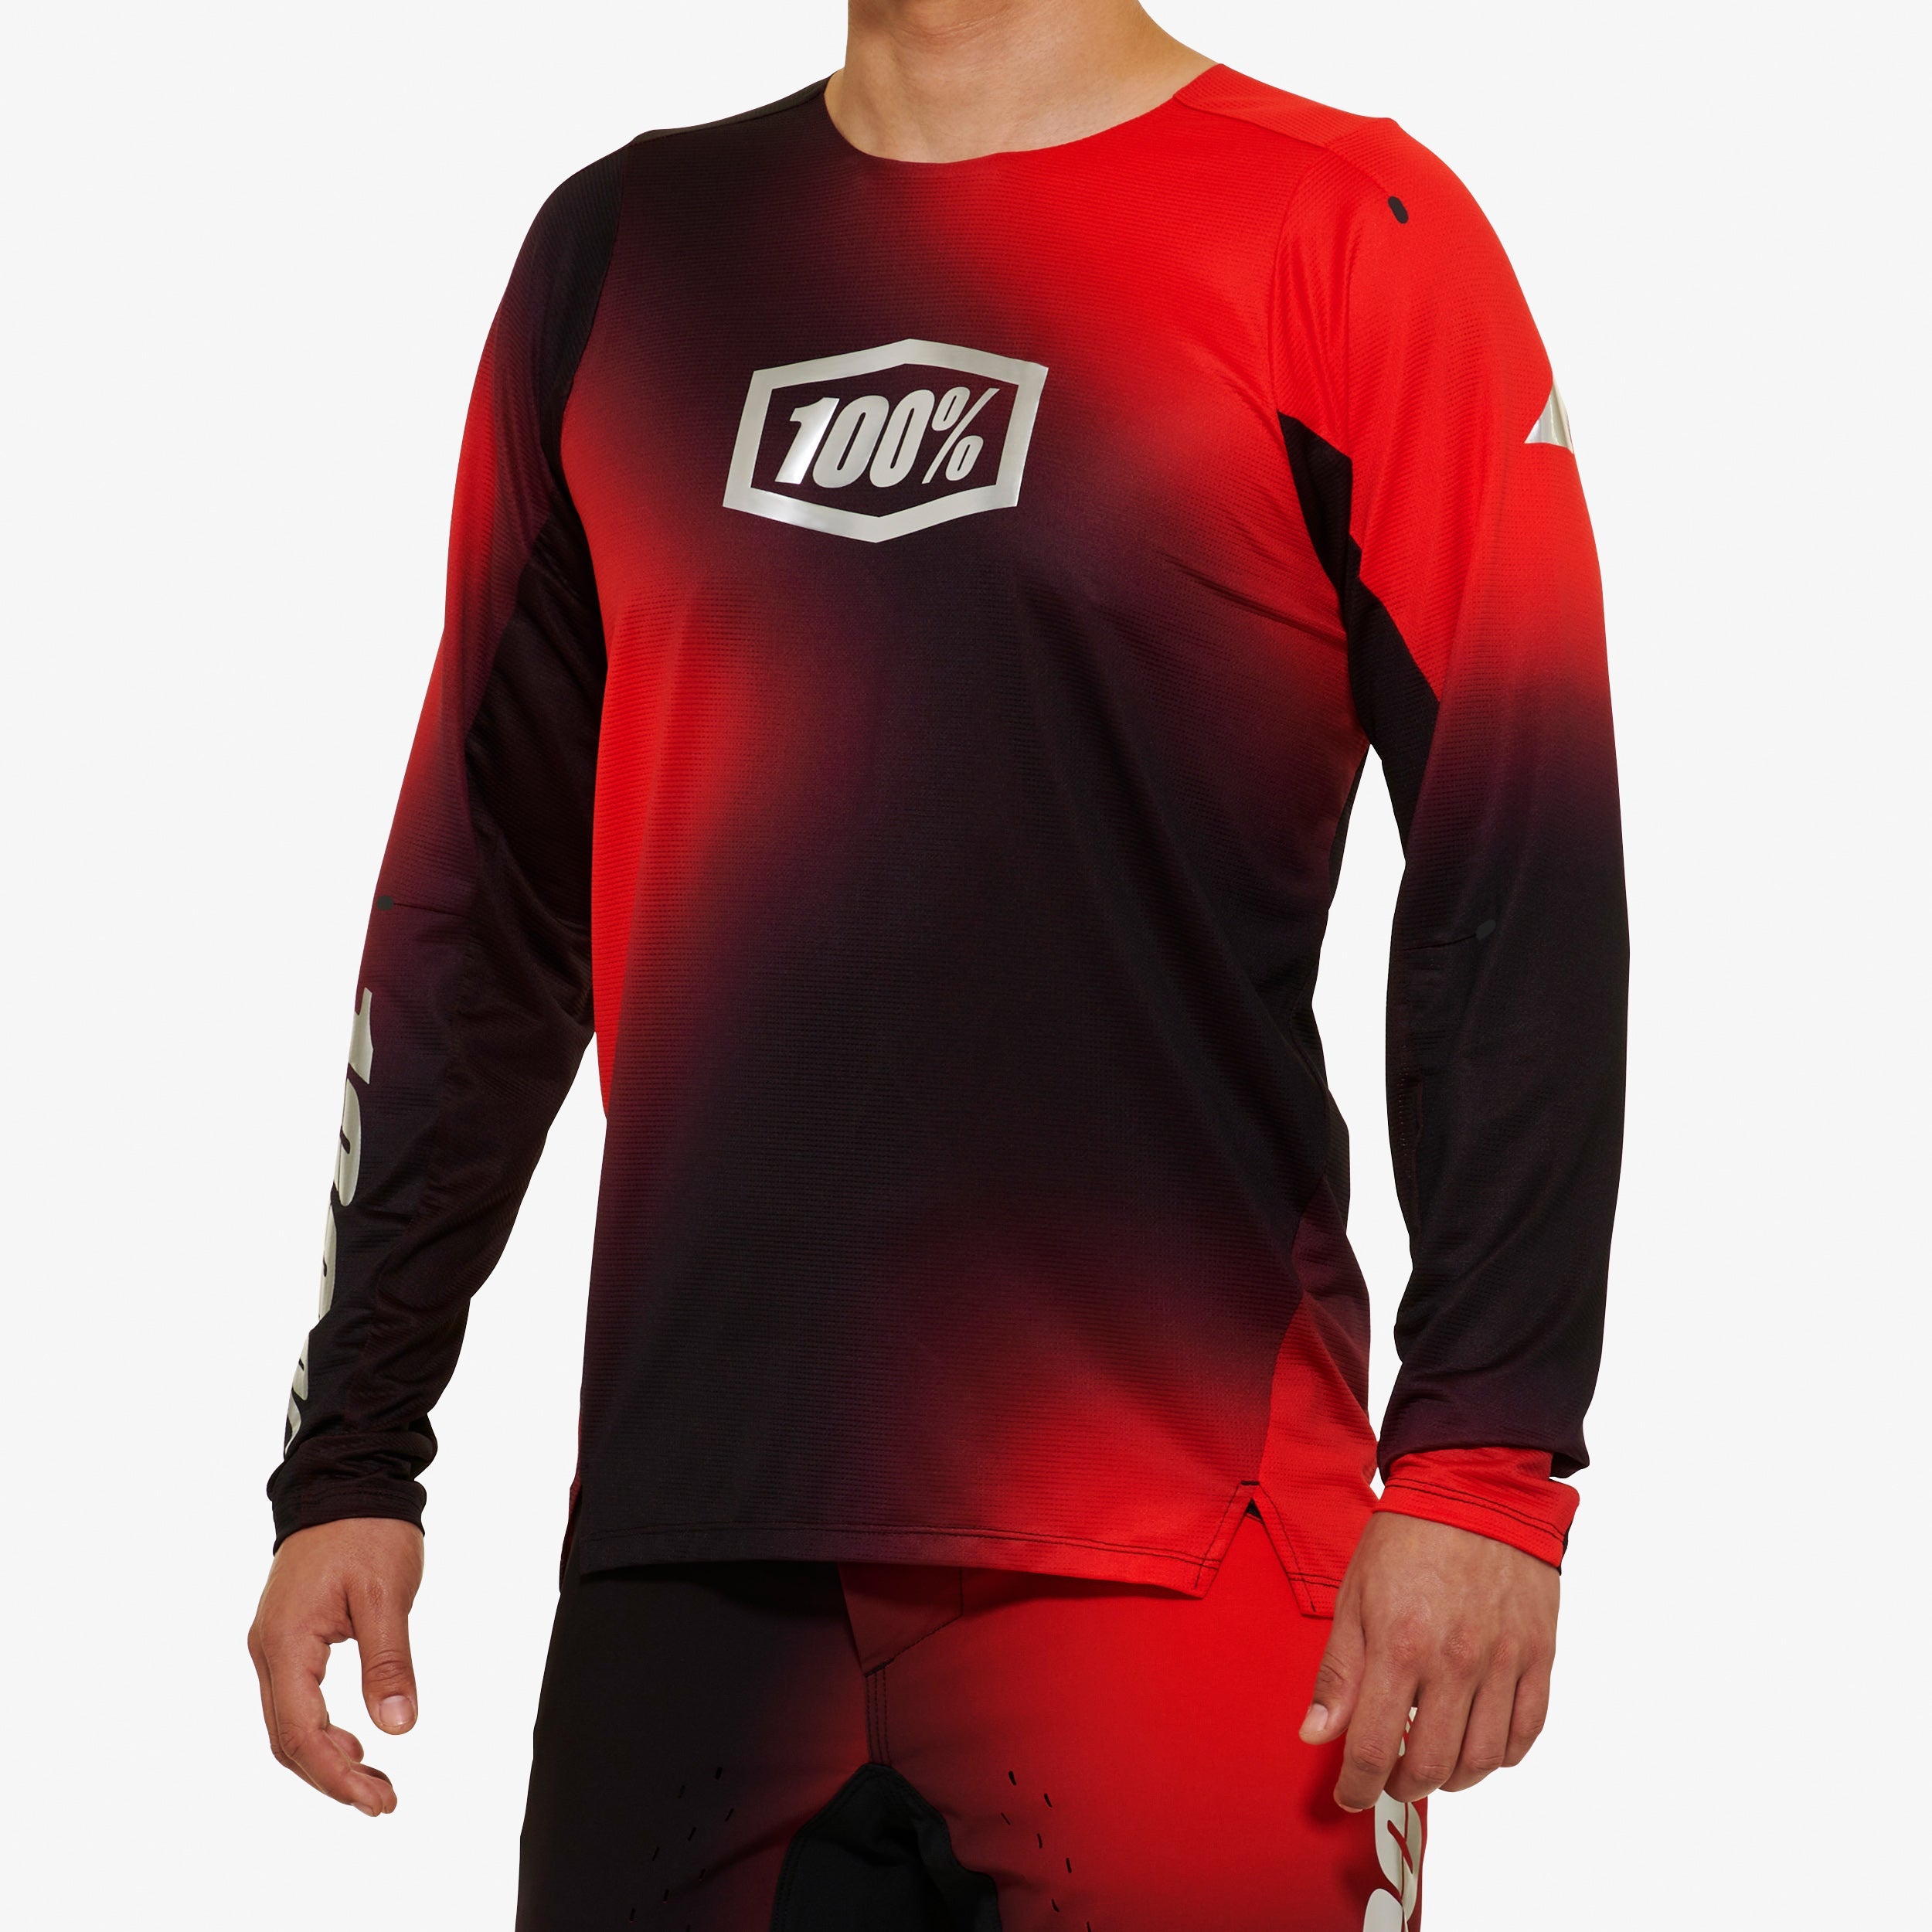 R-CORE X LE Long Sleeve Jersey Black/Red